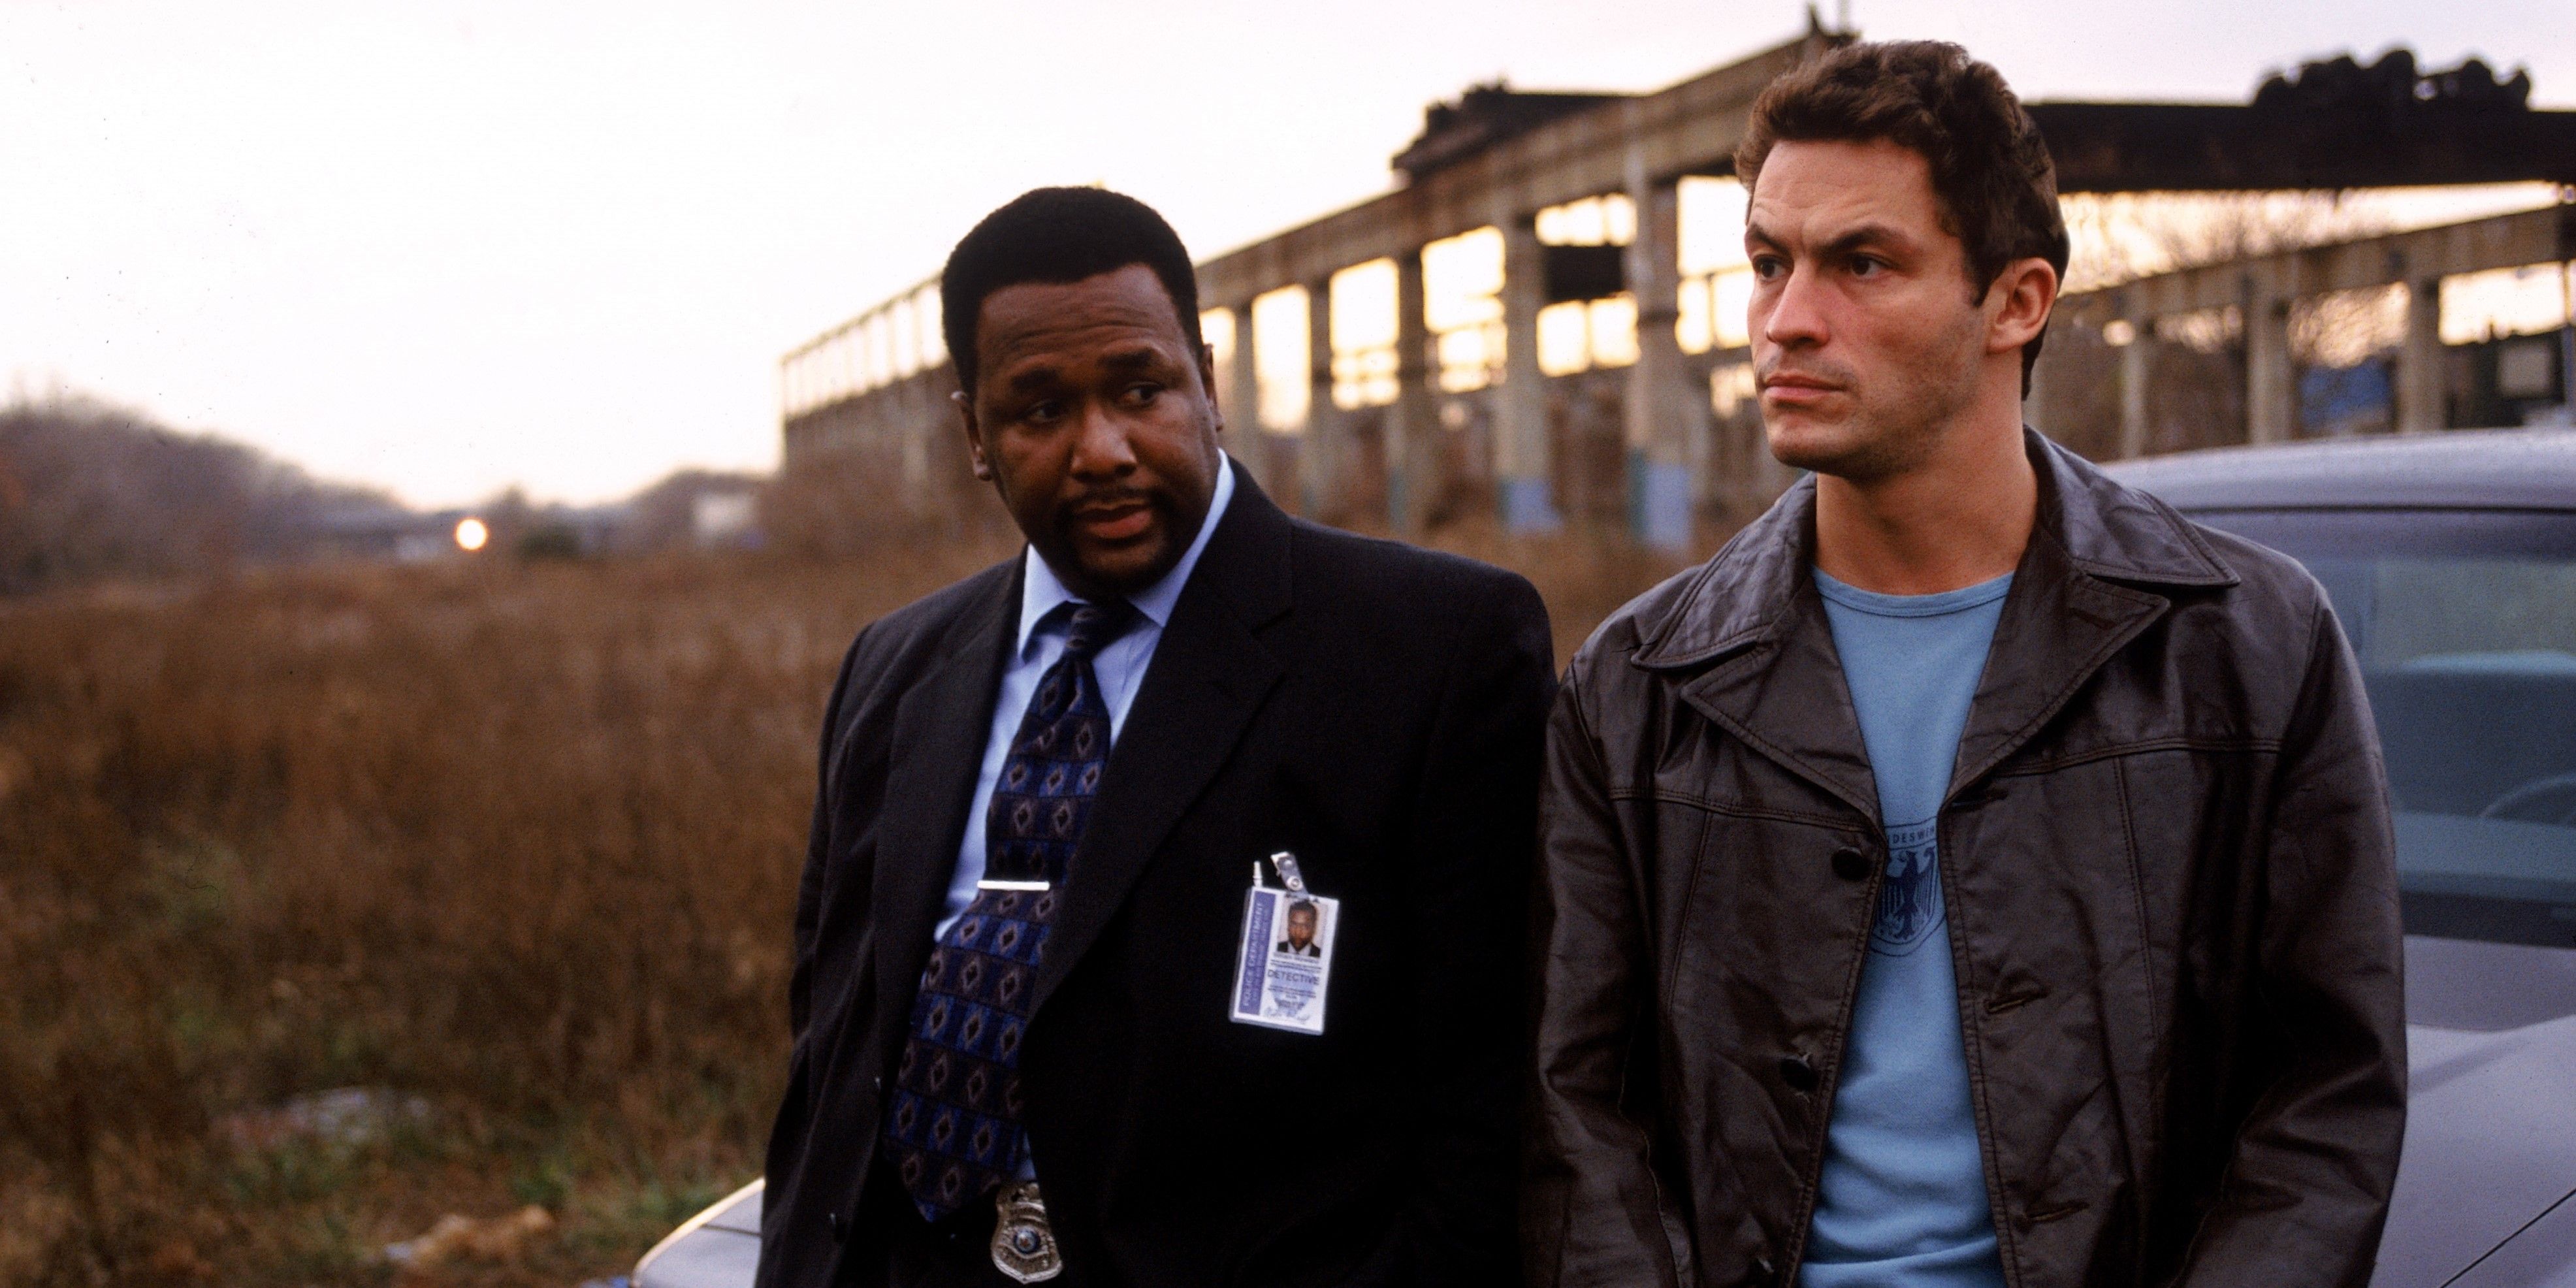 McNulty and Bunk leaning on a car in The Wire